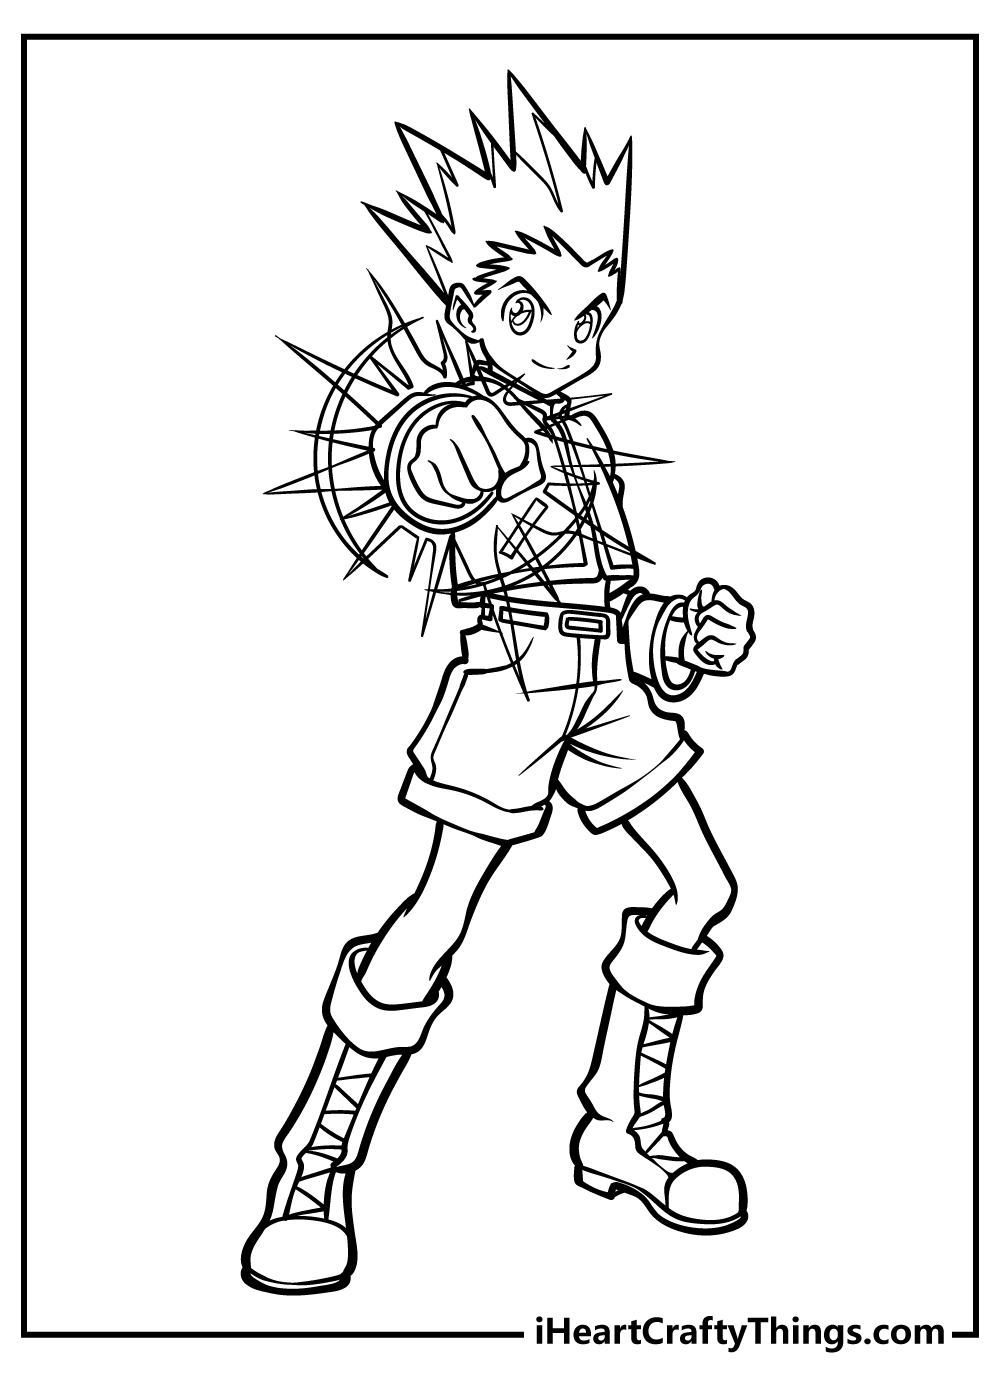 Printable Anime Coloring Pages Updated 20 Inspiring